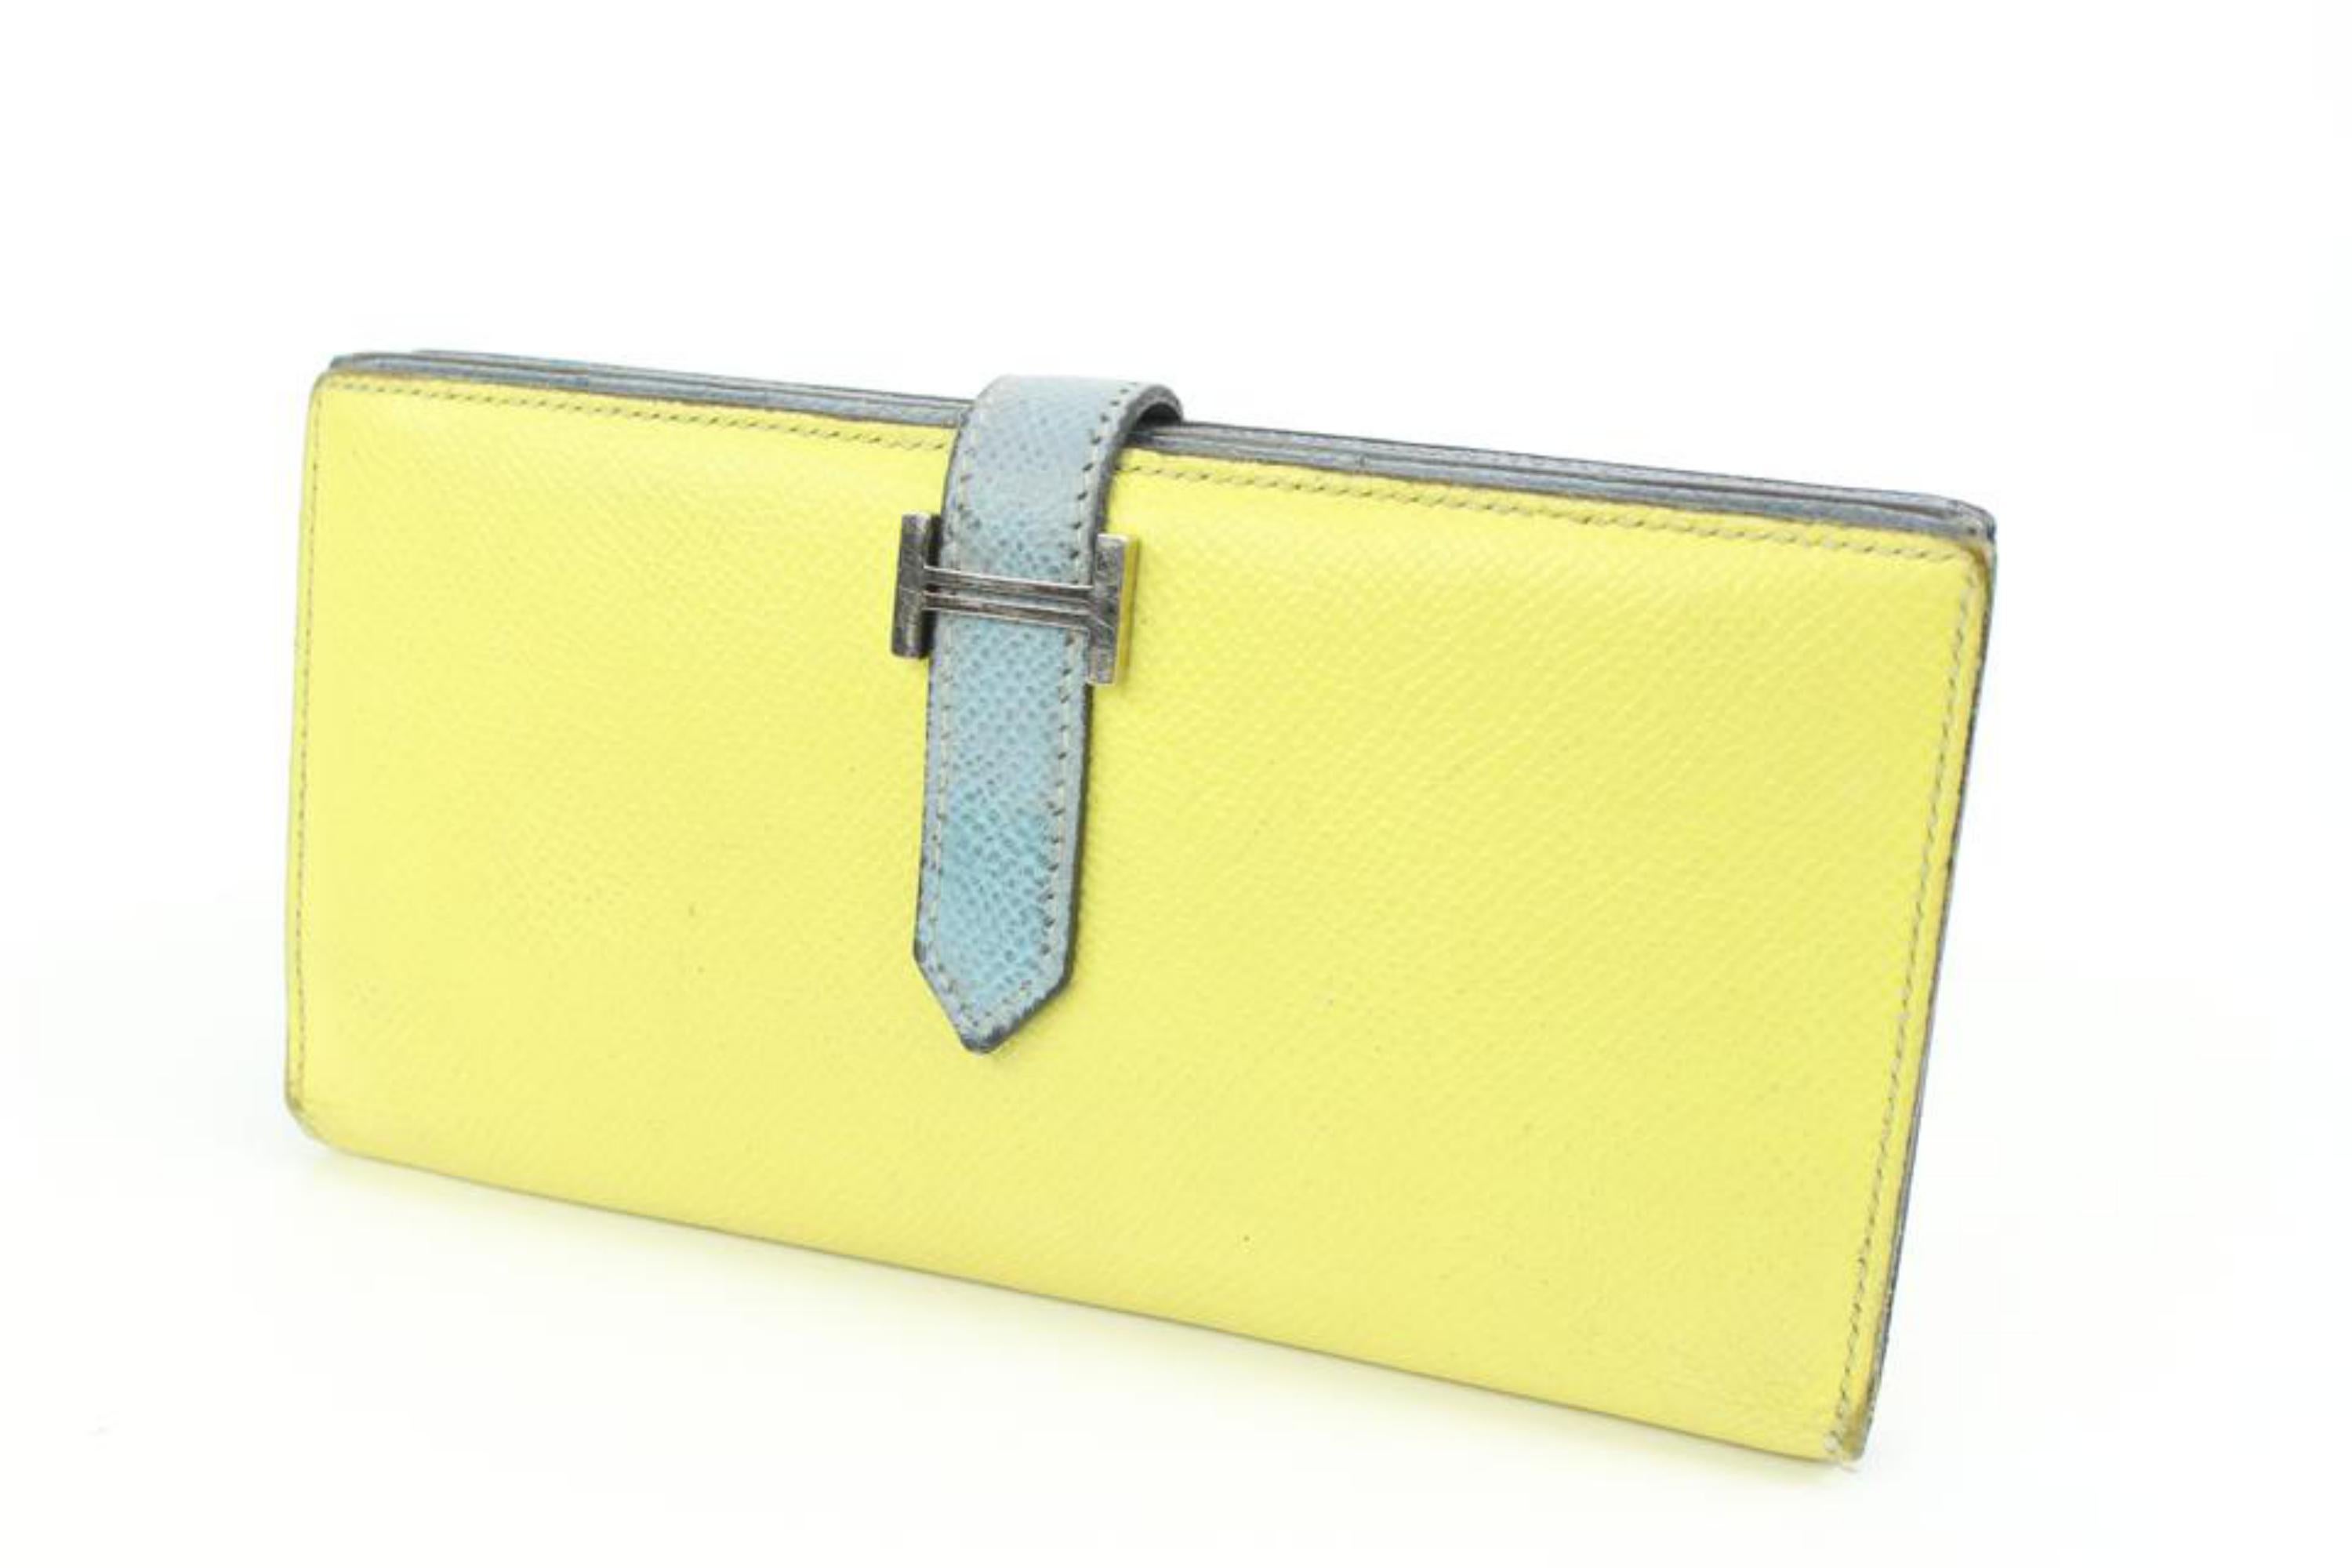 Hermès Yellow x Blue Epsom Leather Long Bifold Bearn Wallet 68h411s
Date Code/Serial Number: Q in a Square
Made In: France
Measurements: Length:  6.8